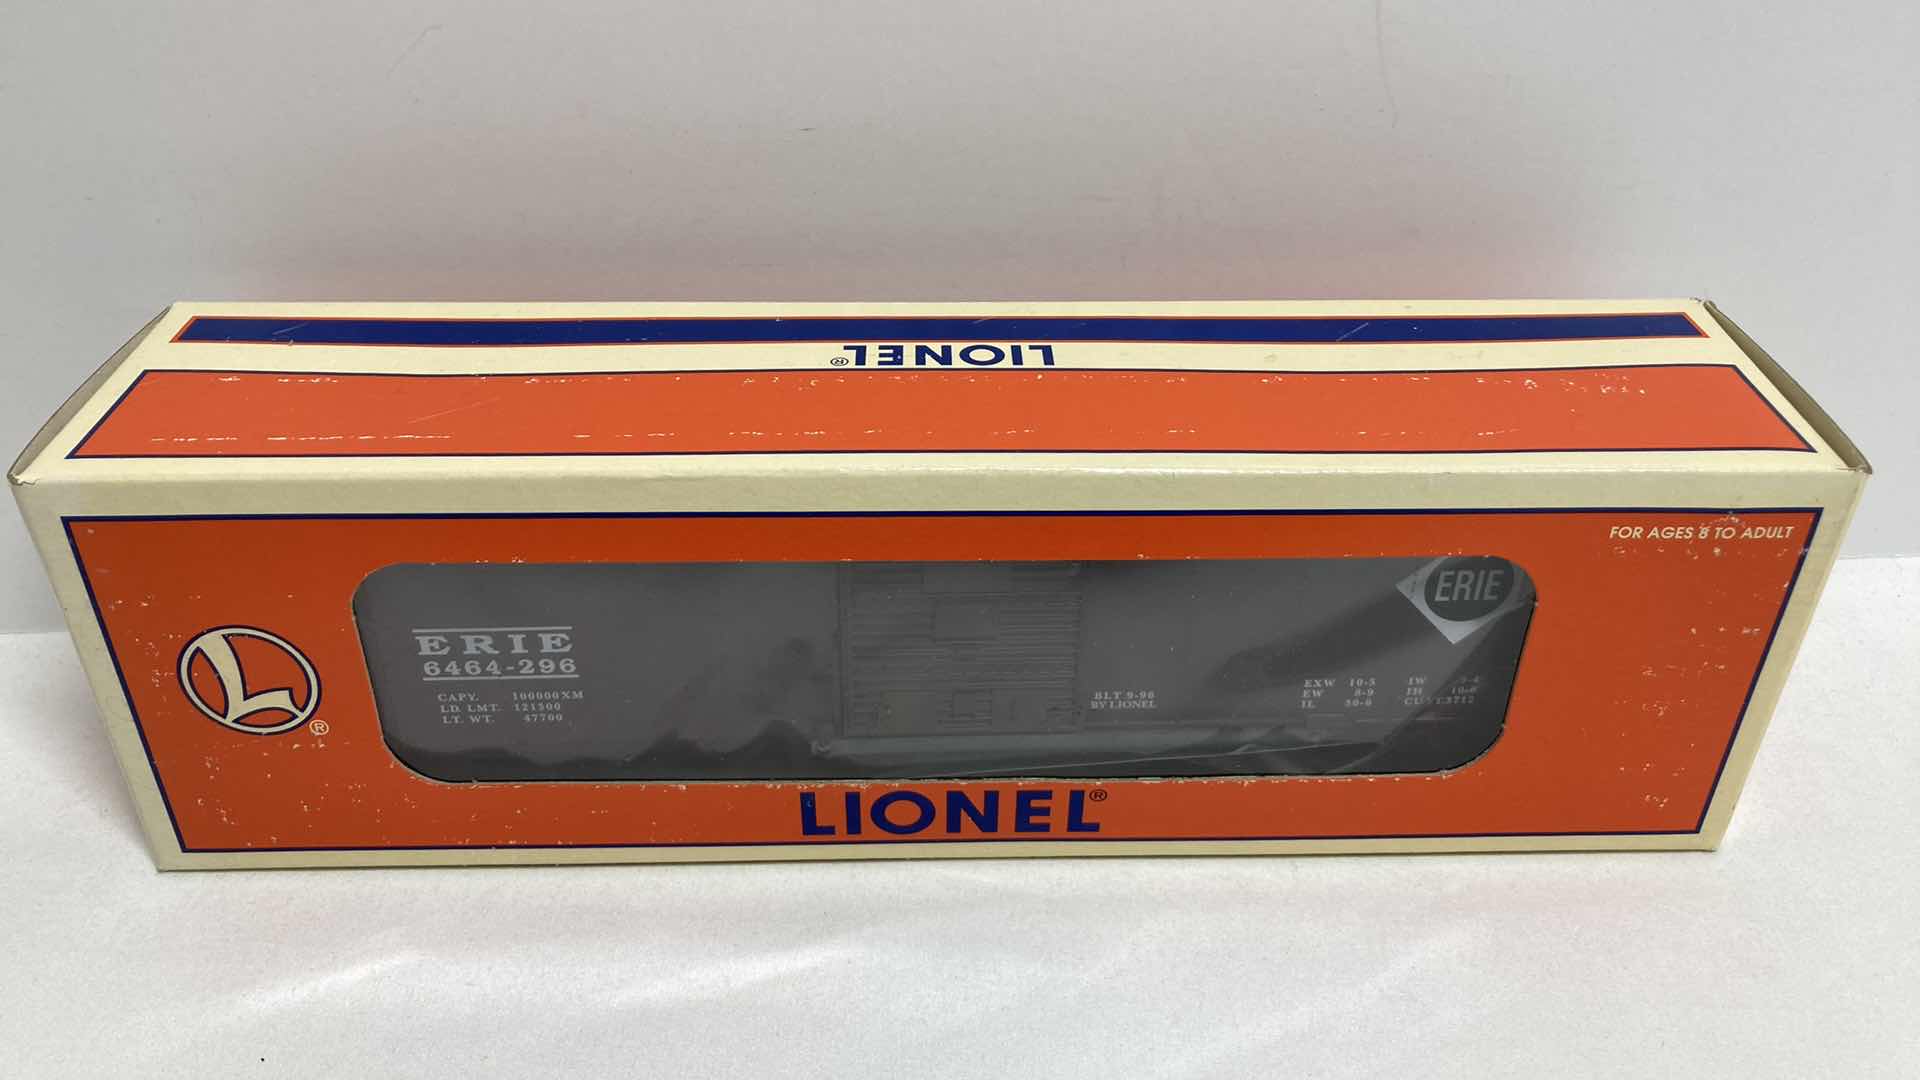 Photo 2 of LIONEL ELECTRIC TRAINS ERIE 6464-296